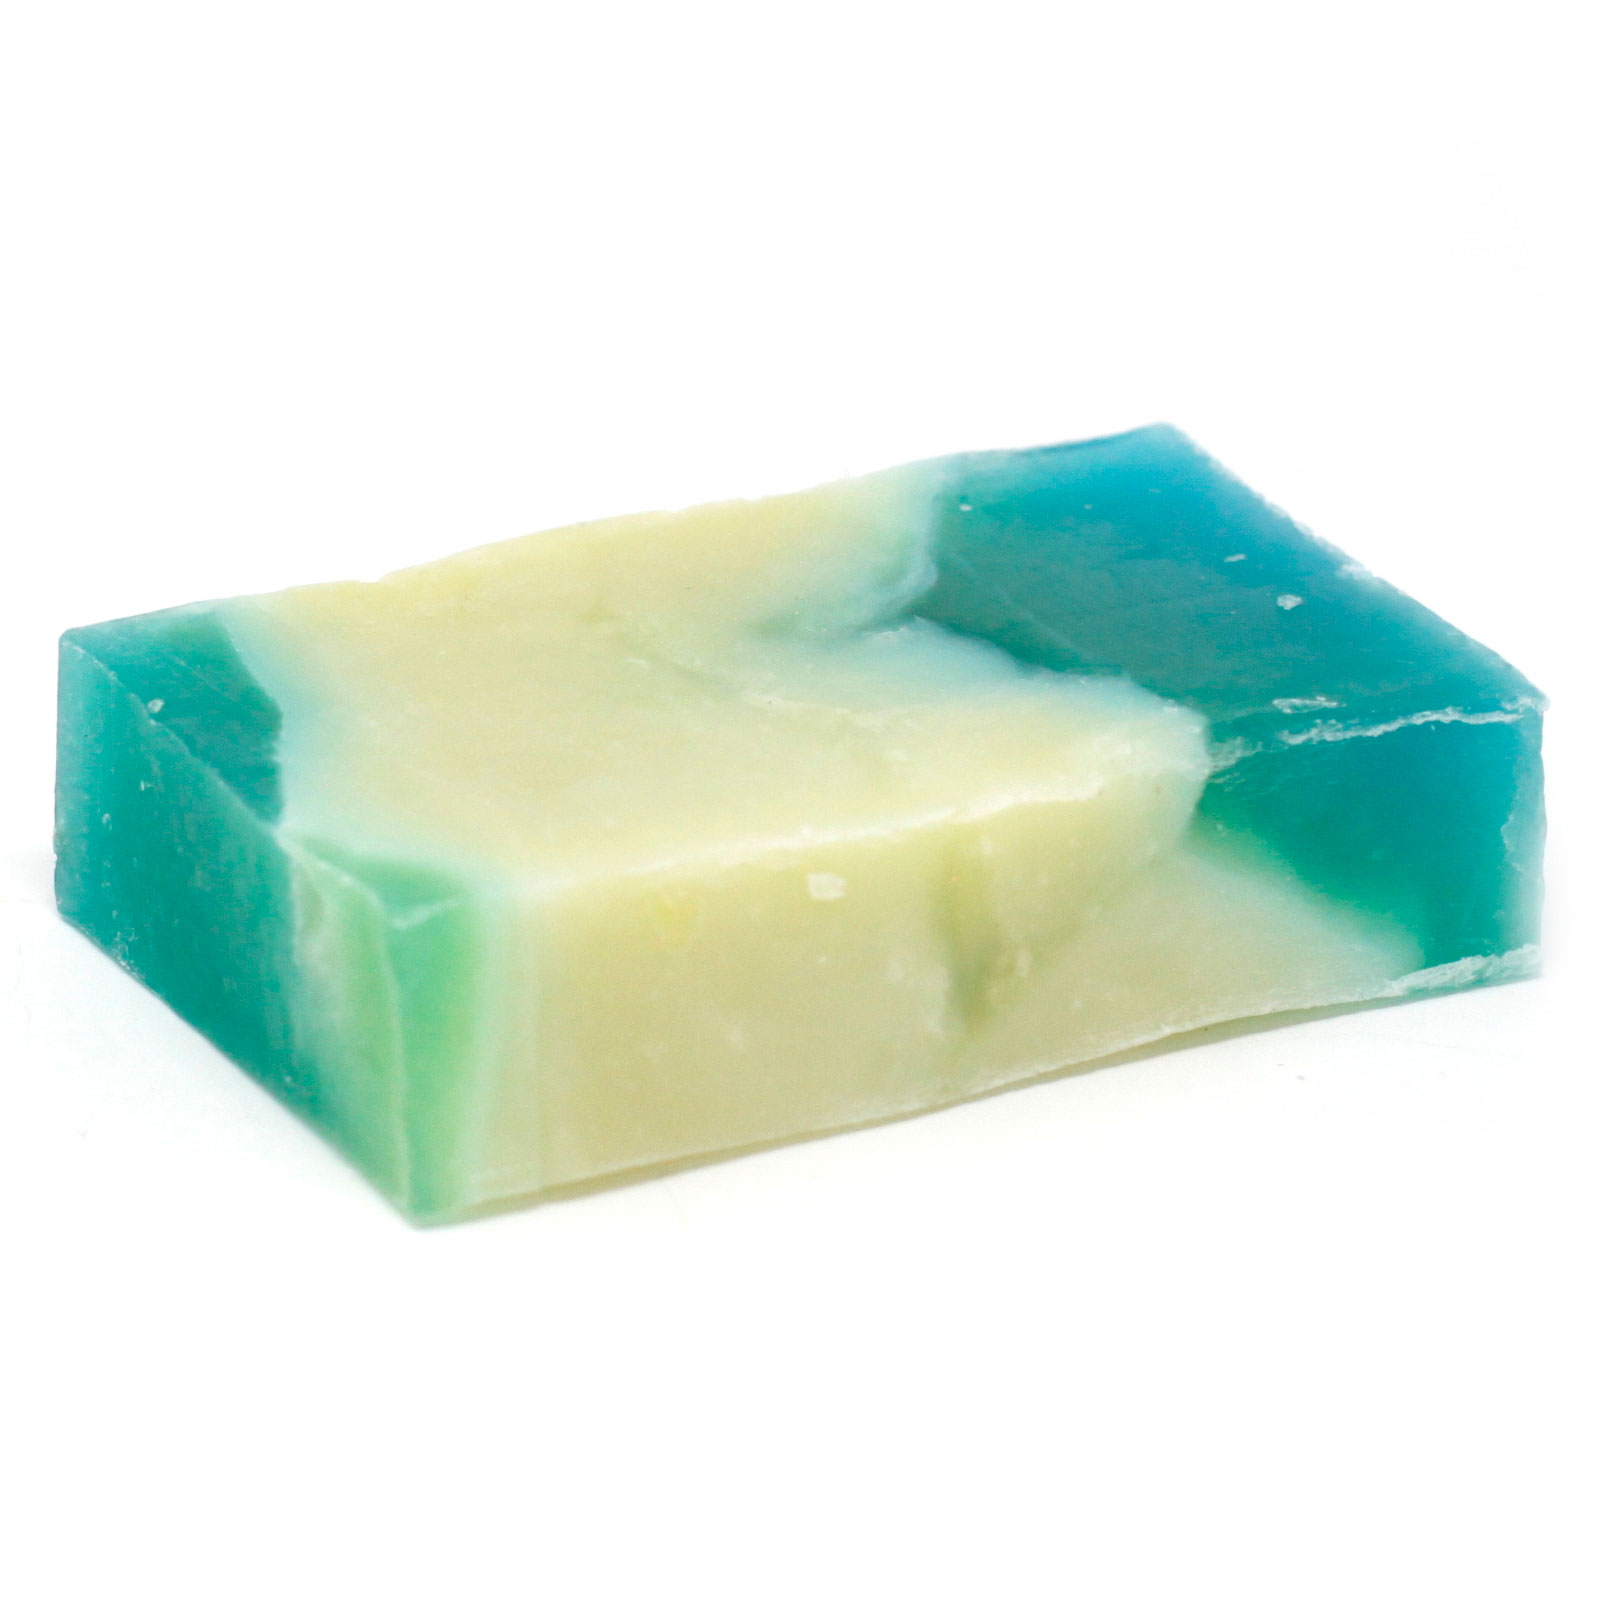 Rosemary - Olive Oil Soap - SLICE approx 100g